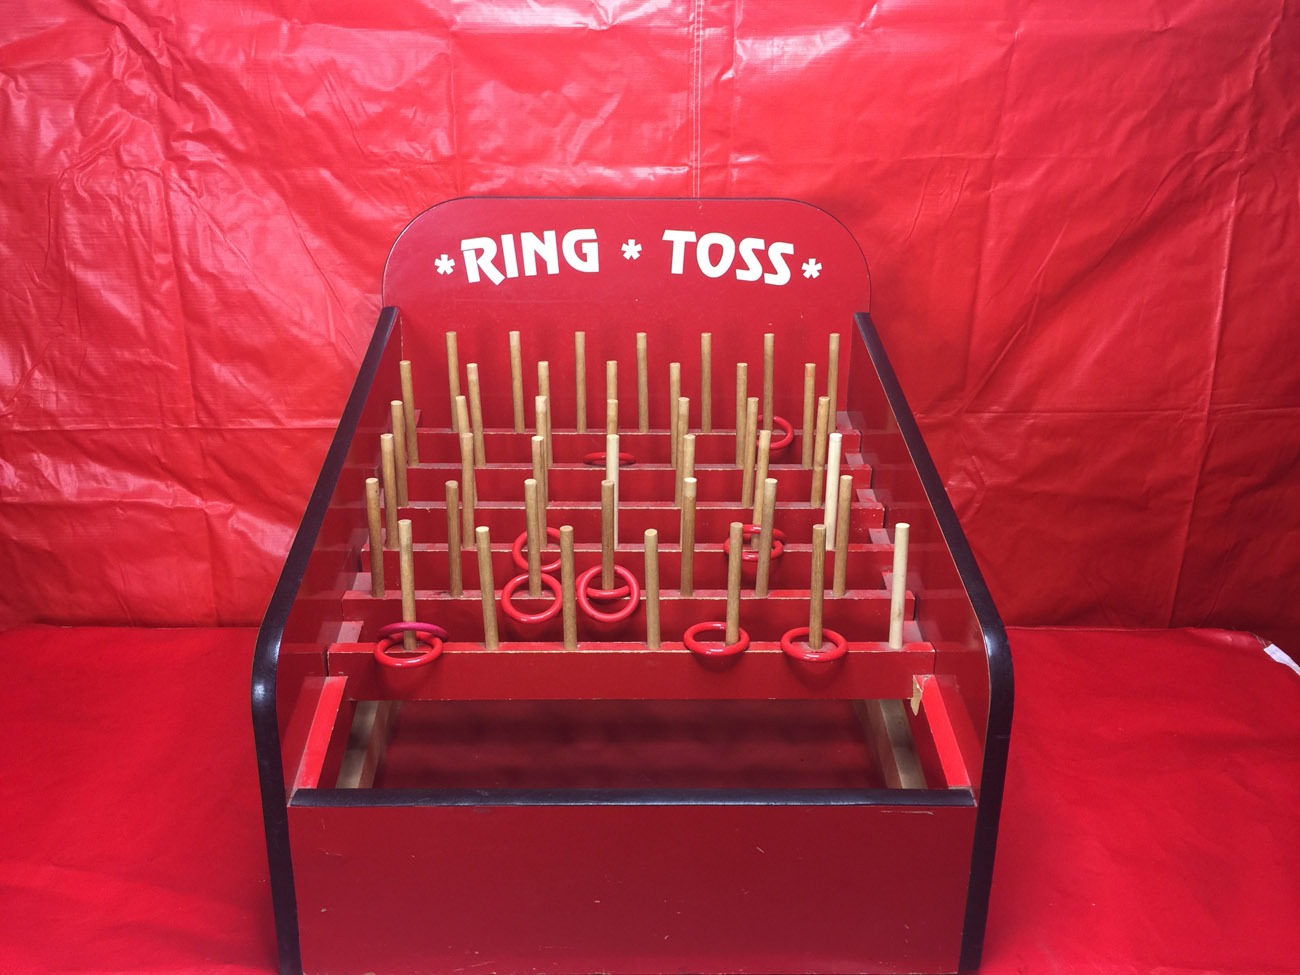 Where Did The Carnival Game Ring Toss Come From